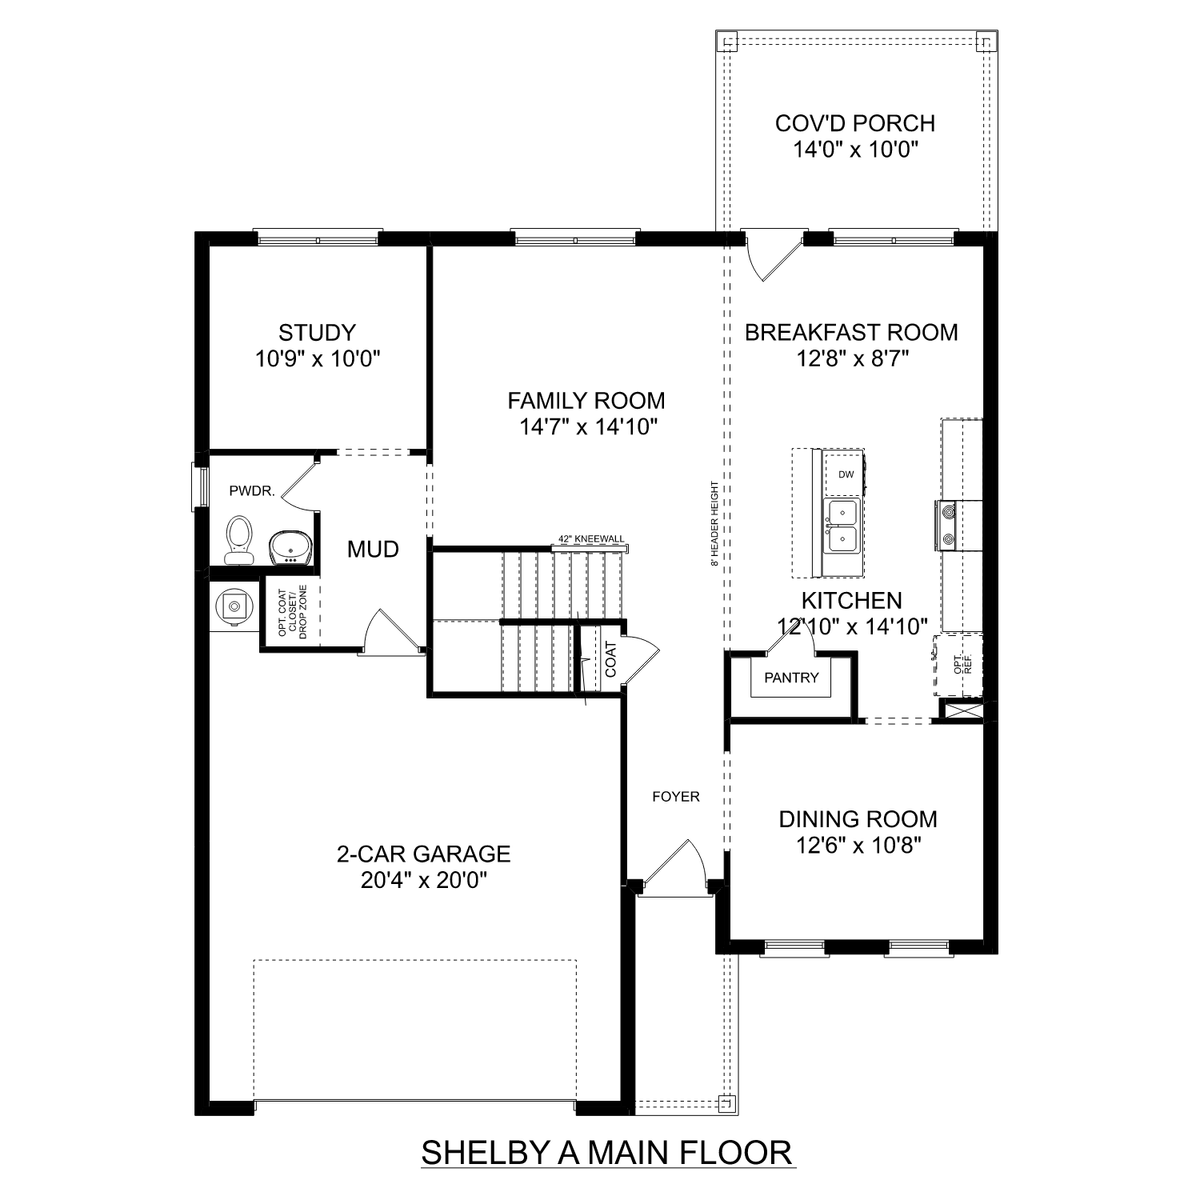 1 - The Shelby A buildable floor plan layout in Davidson Homes' Creekside community.